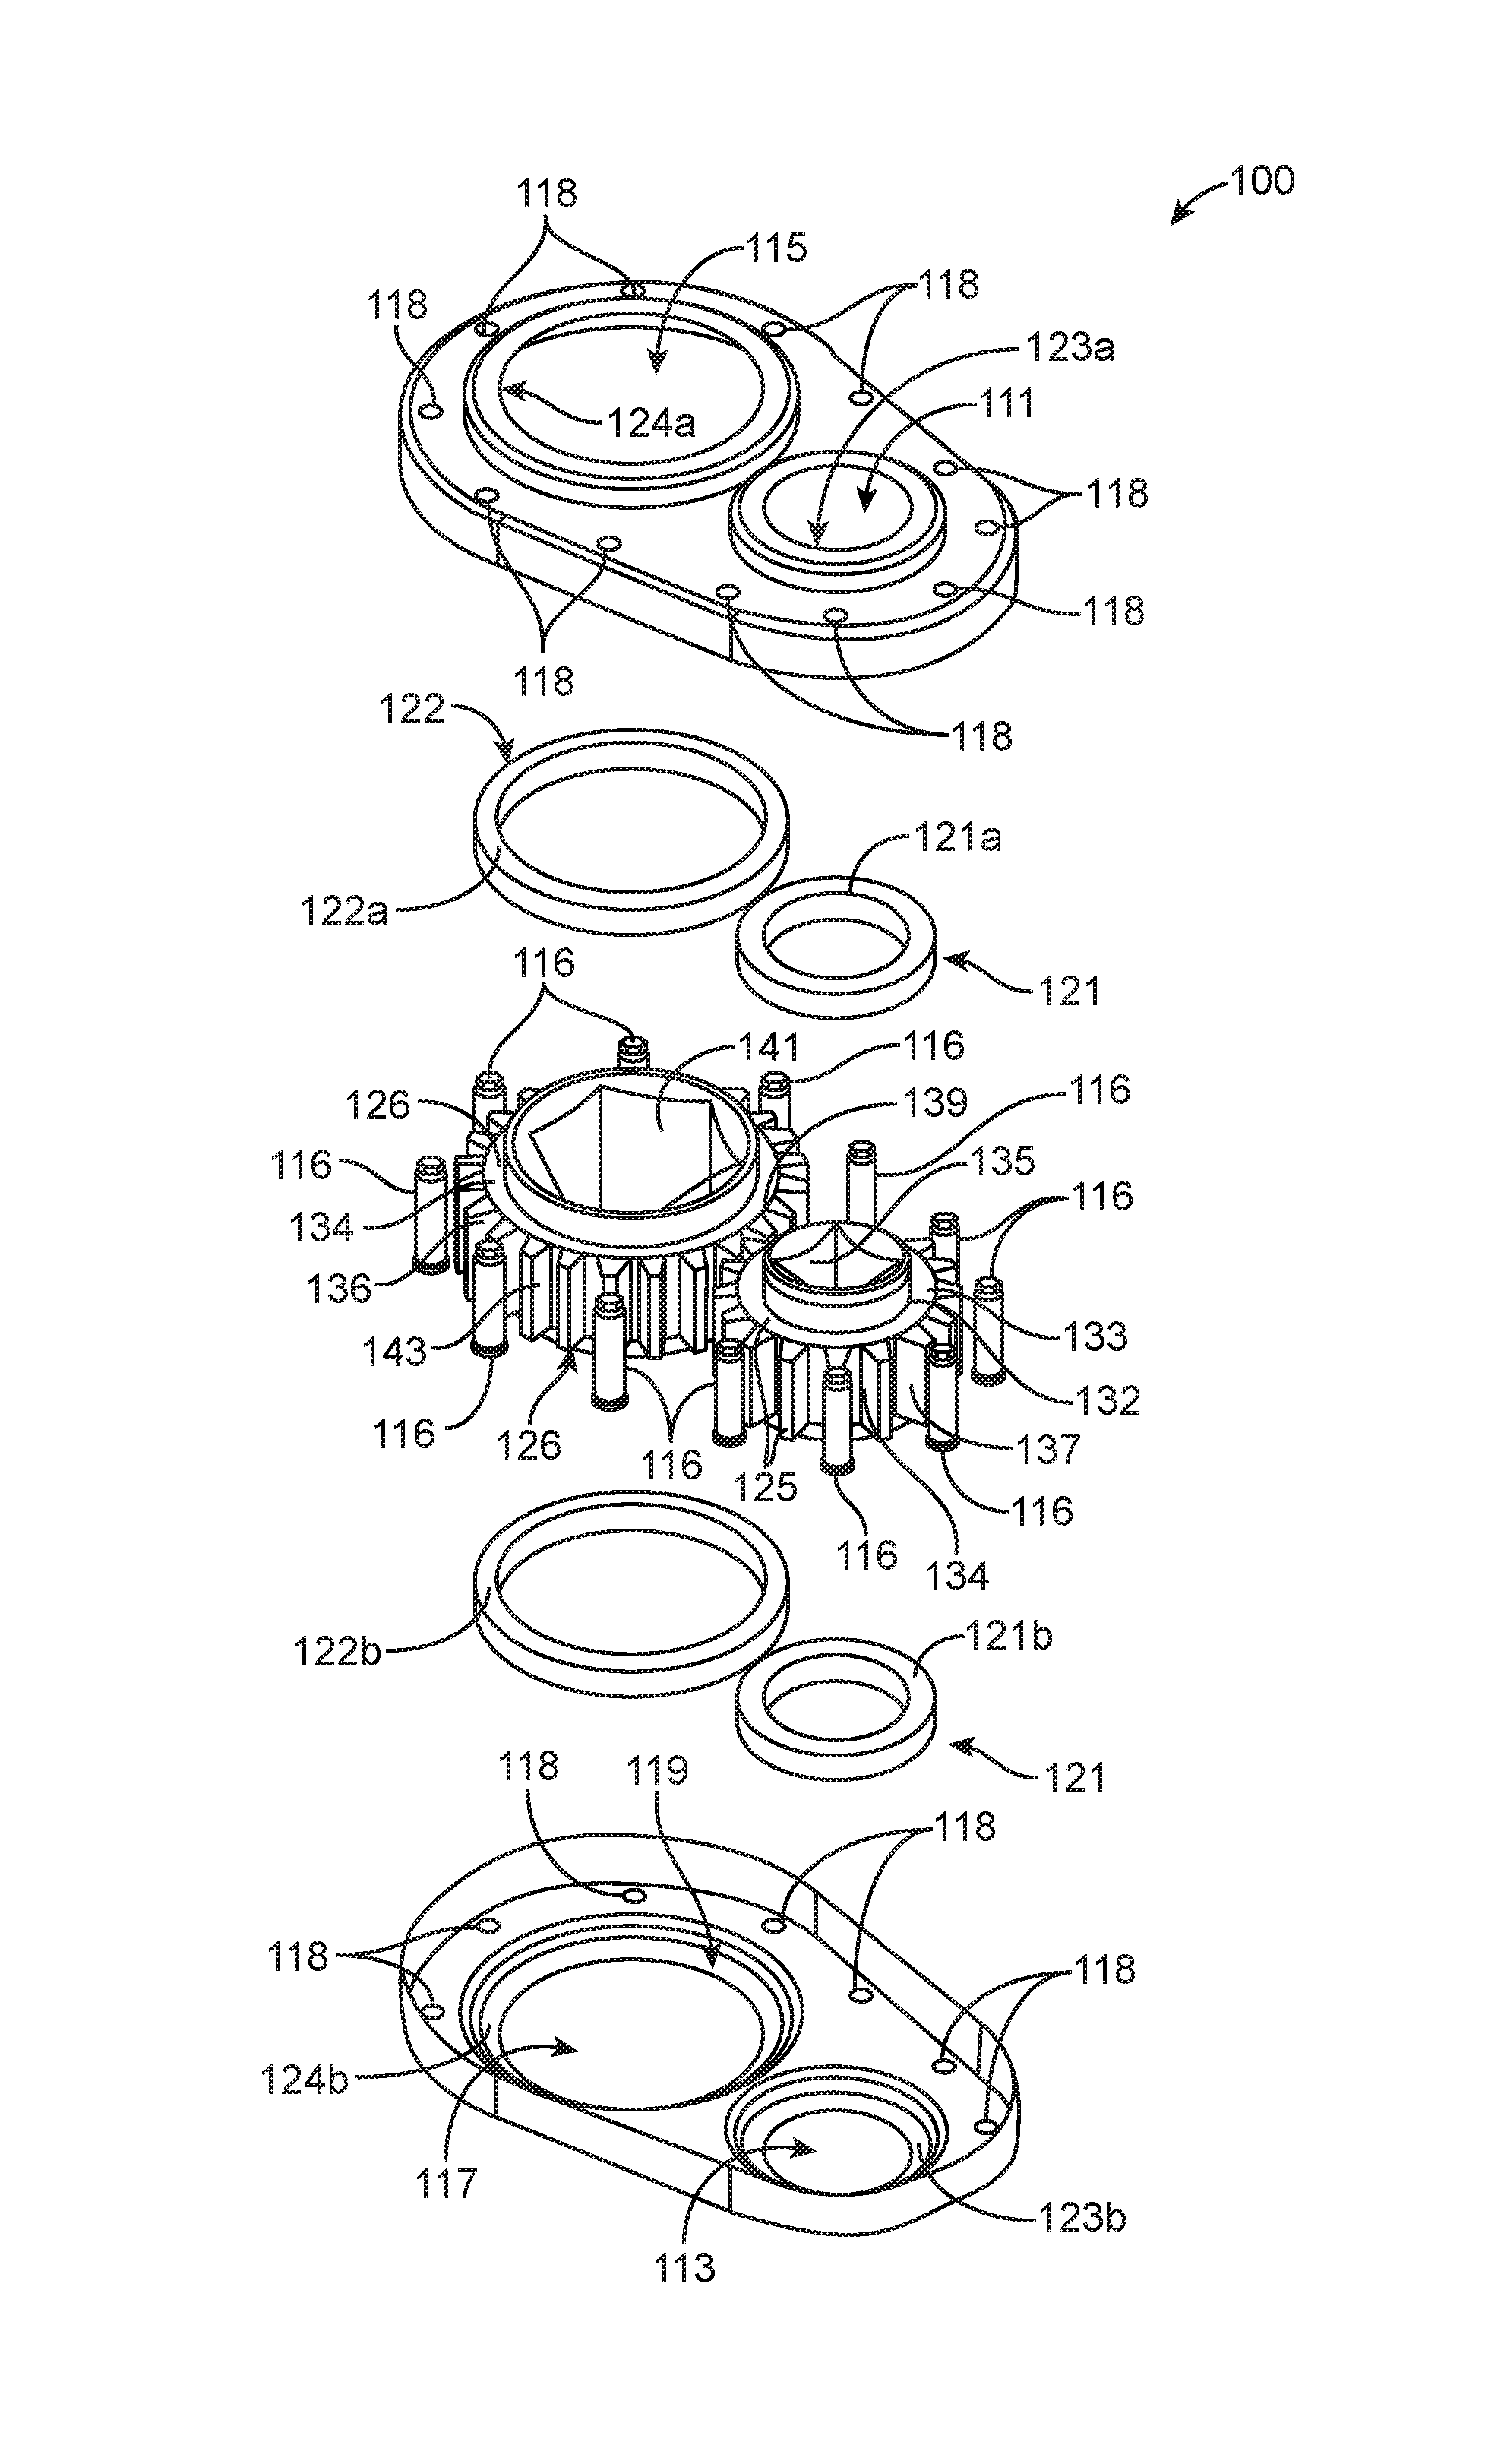 Offset torque drive apparatus and system